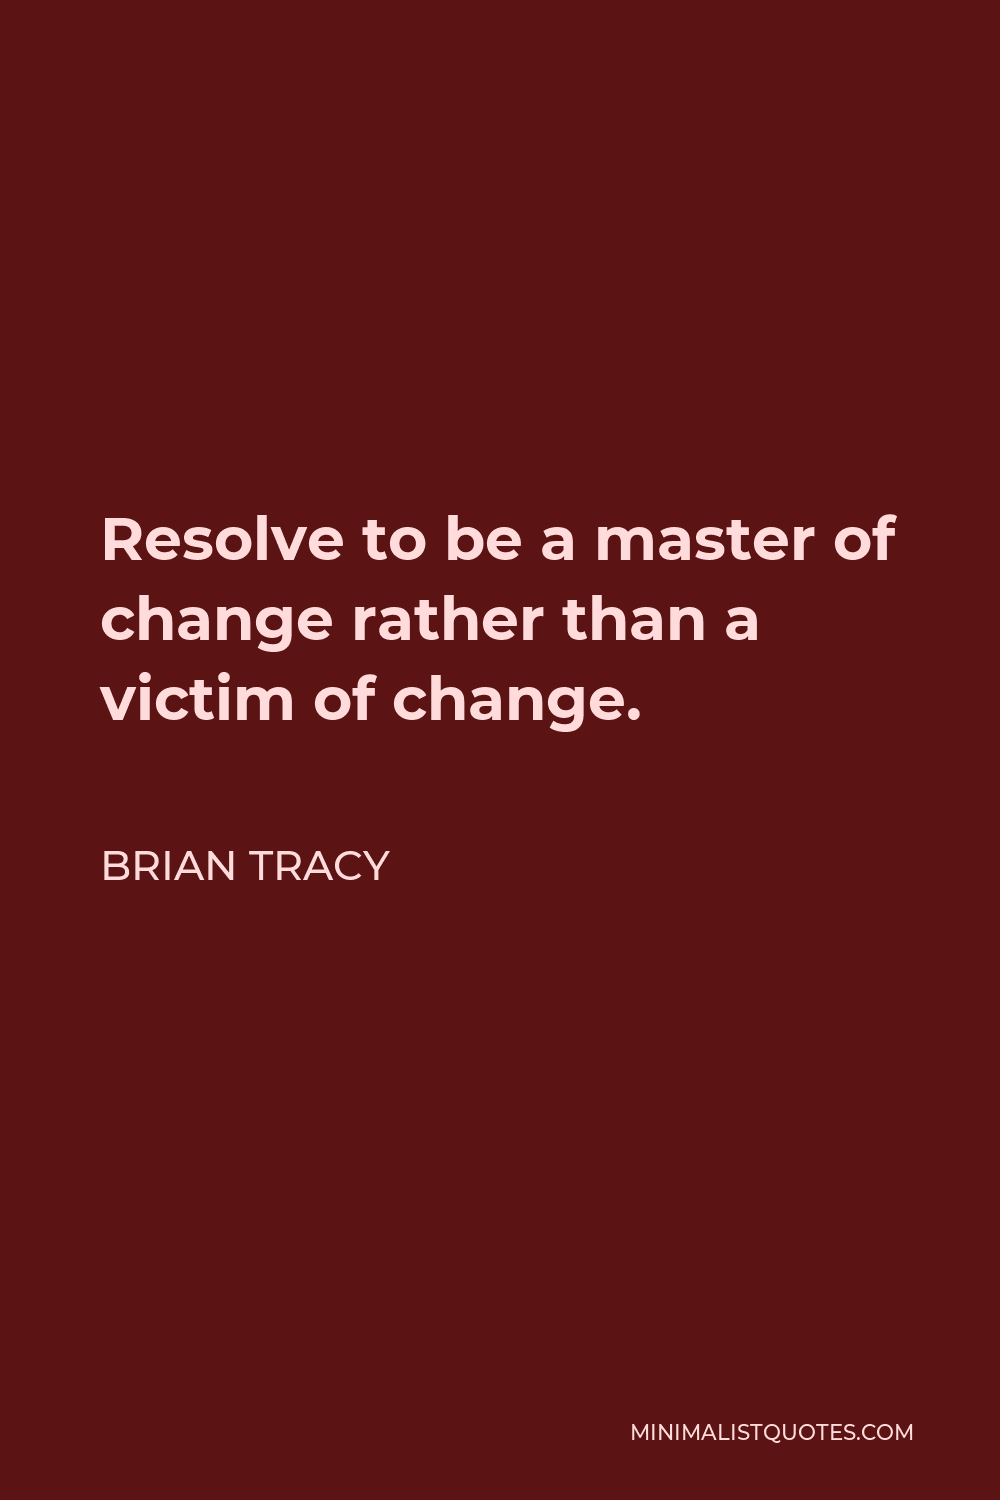 Brian Tracy Quote - Resolve to be a master of change rather than a victim of change.